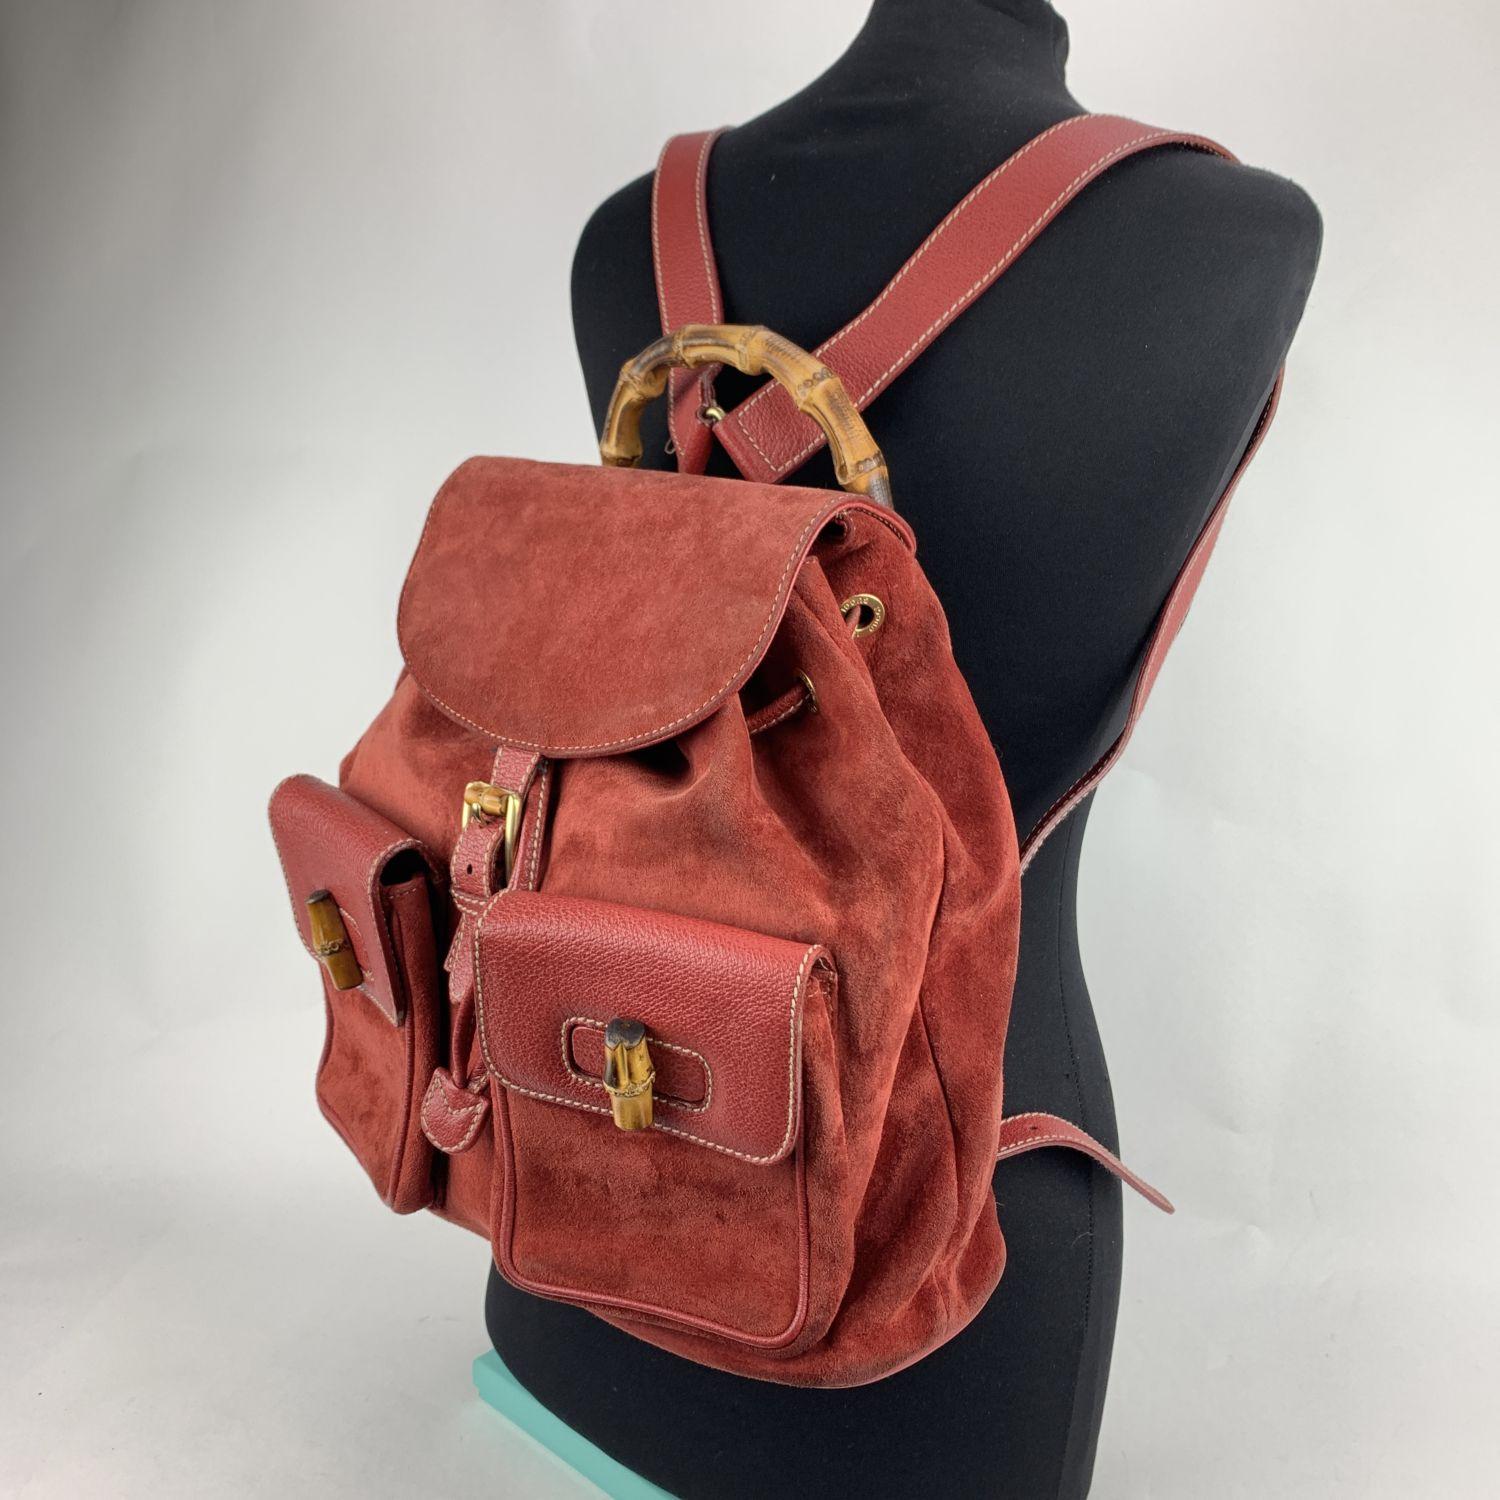 Vintage backpack by Gucci, crafted in red suede and leather. It features Bamboo handle and knobs. 2 front flap pockets.Flap with buckle closure and drawstring top opening. Internal beige diamond lining. 1 side zipper pocket inside (GUCCI - GG gold